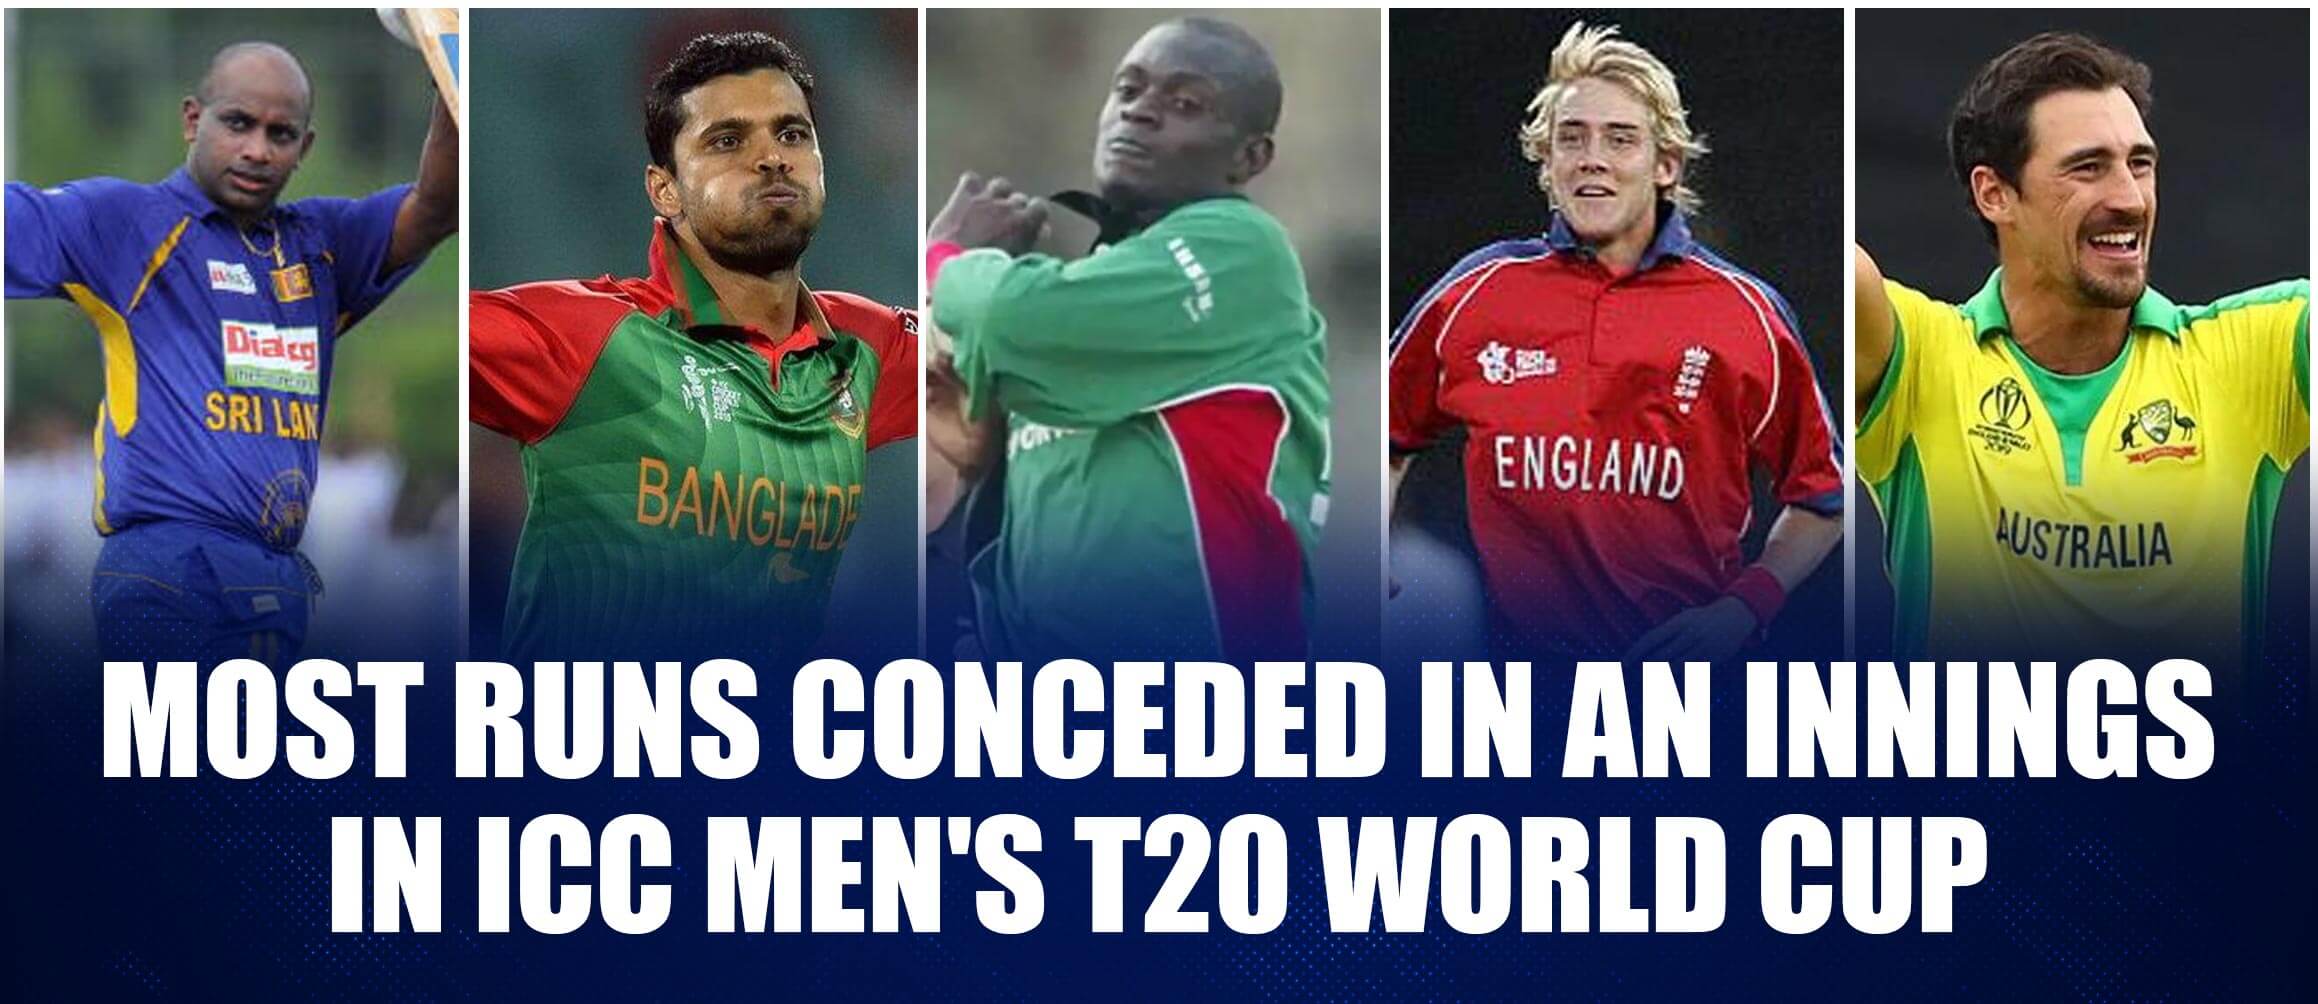 Most Runs Conceded In An Innings In ICC Men’s T20 World Cup